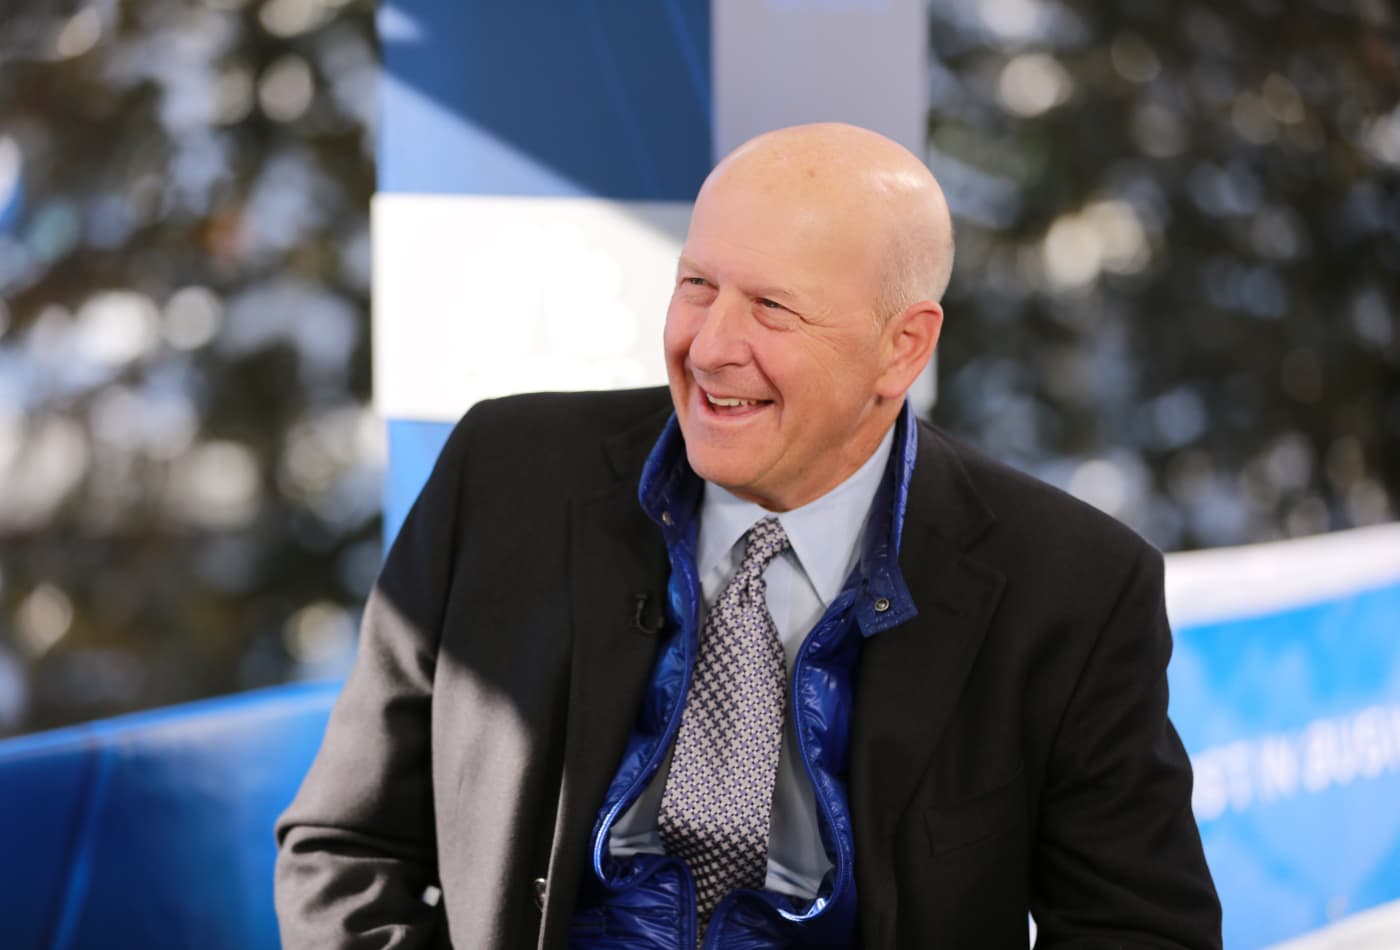 Goldman Sachs CEO: The US economy 'is chugging along pretty well'